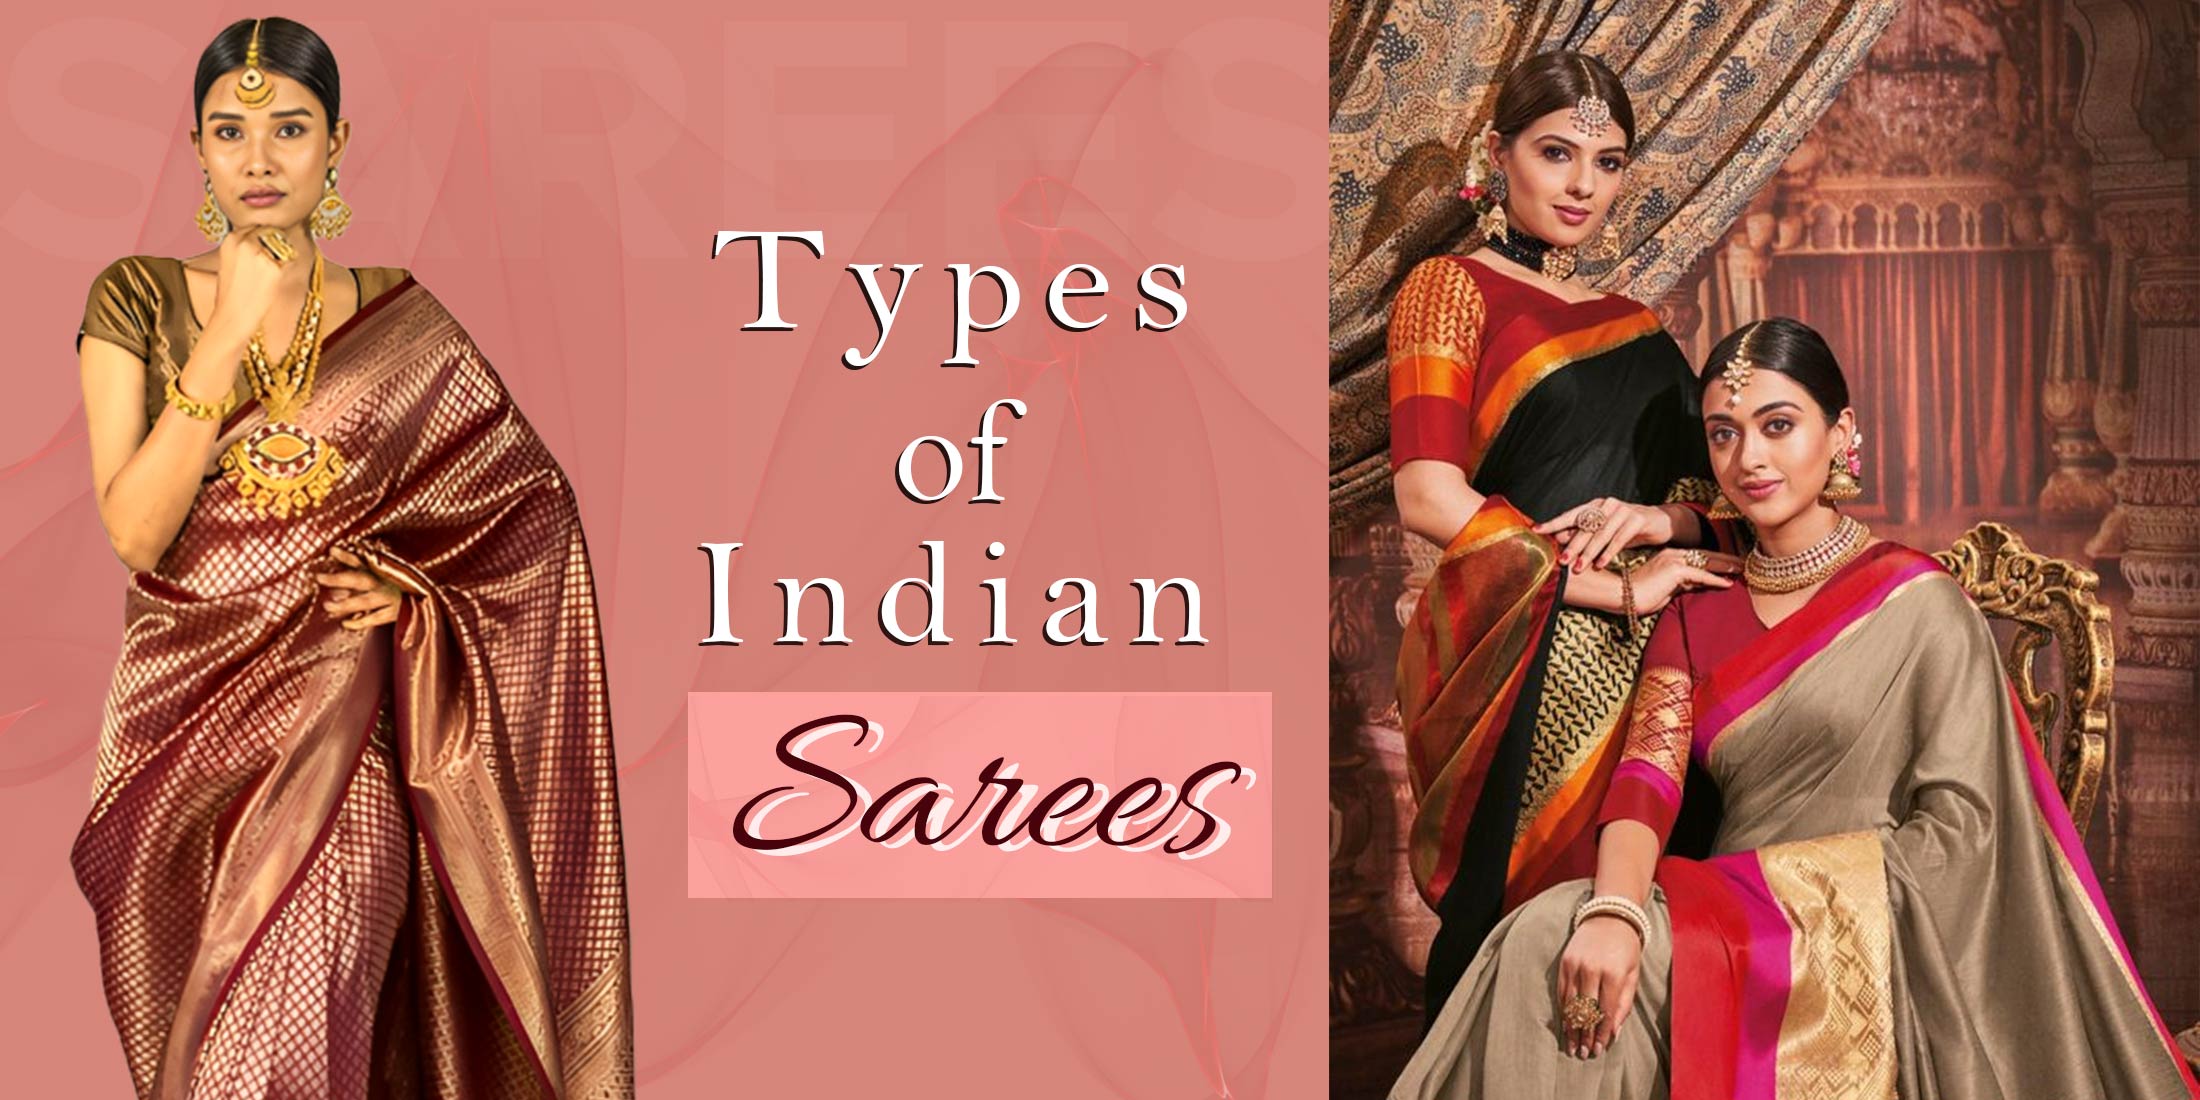 15 Best Saree Brands to Buy Latest Designs in India | Most Famous Saree  Brands with Trending Designs